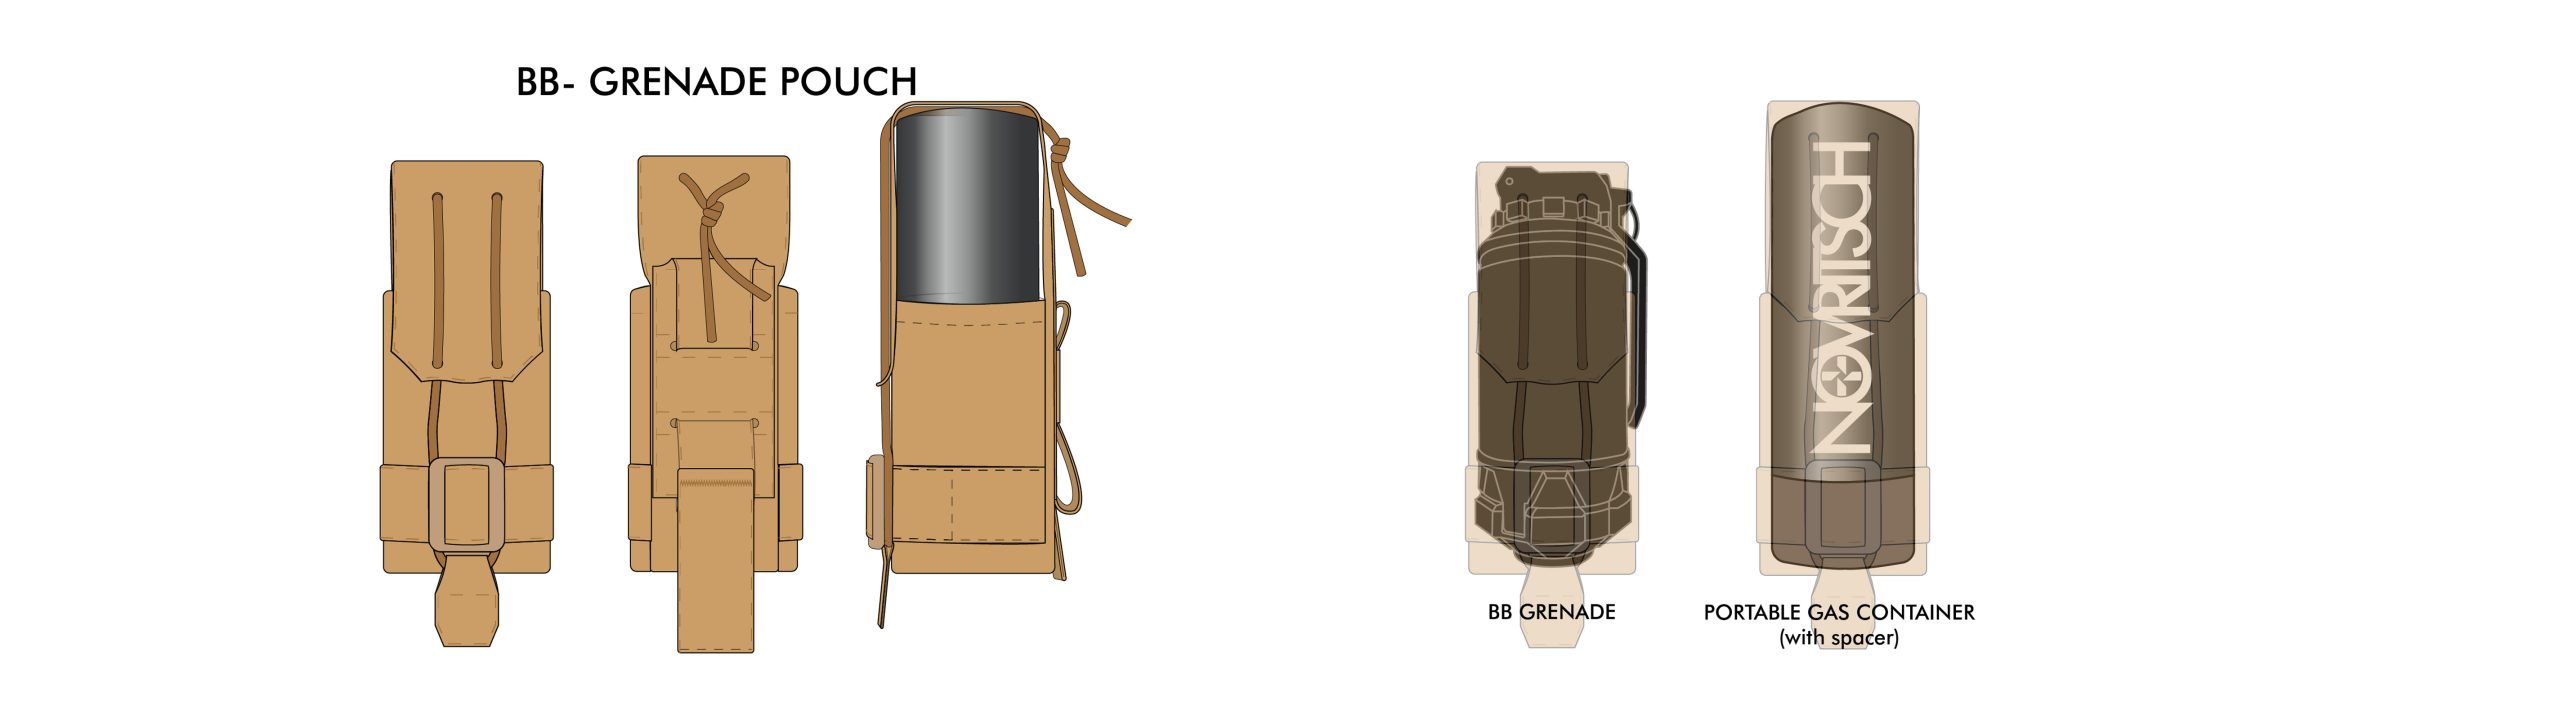 Pouch-Compatability-Chart_BB-Grenade-Pouch-scaled.jpg